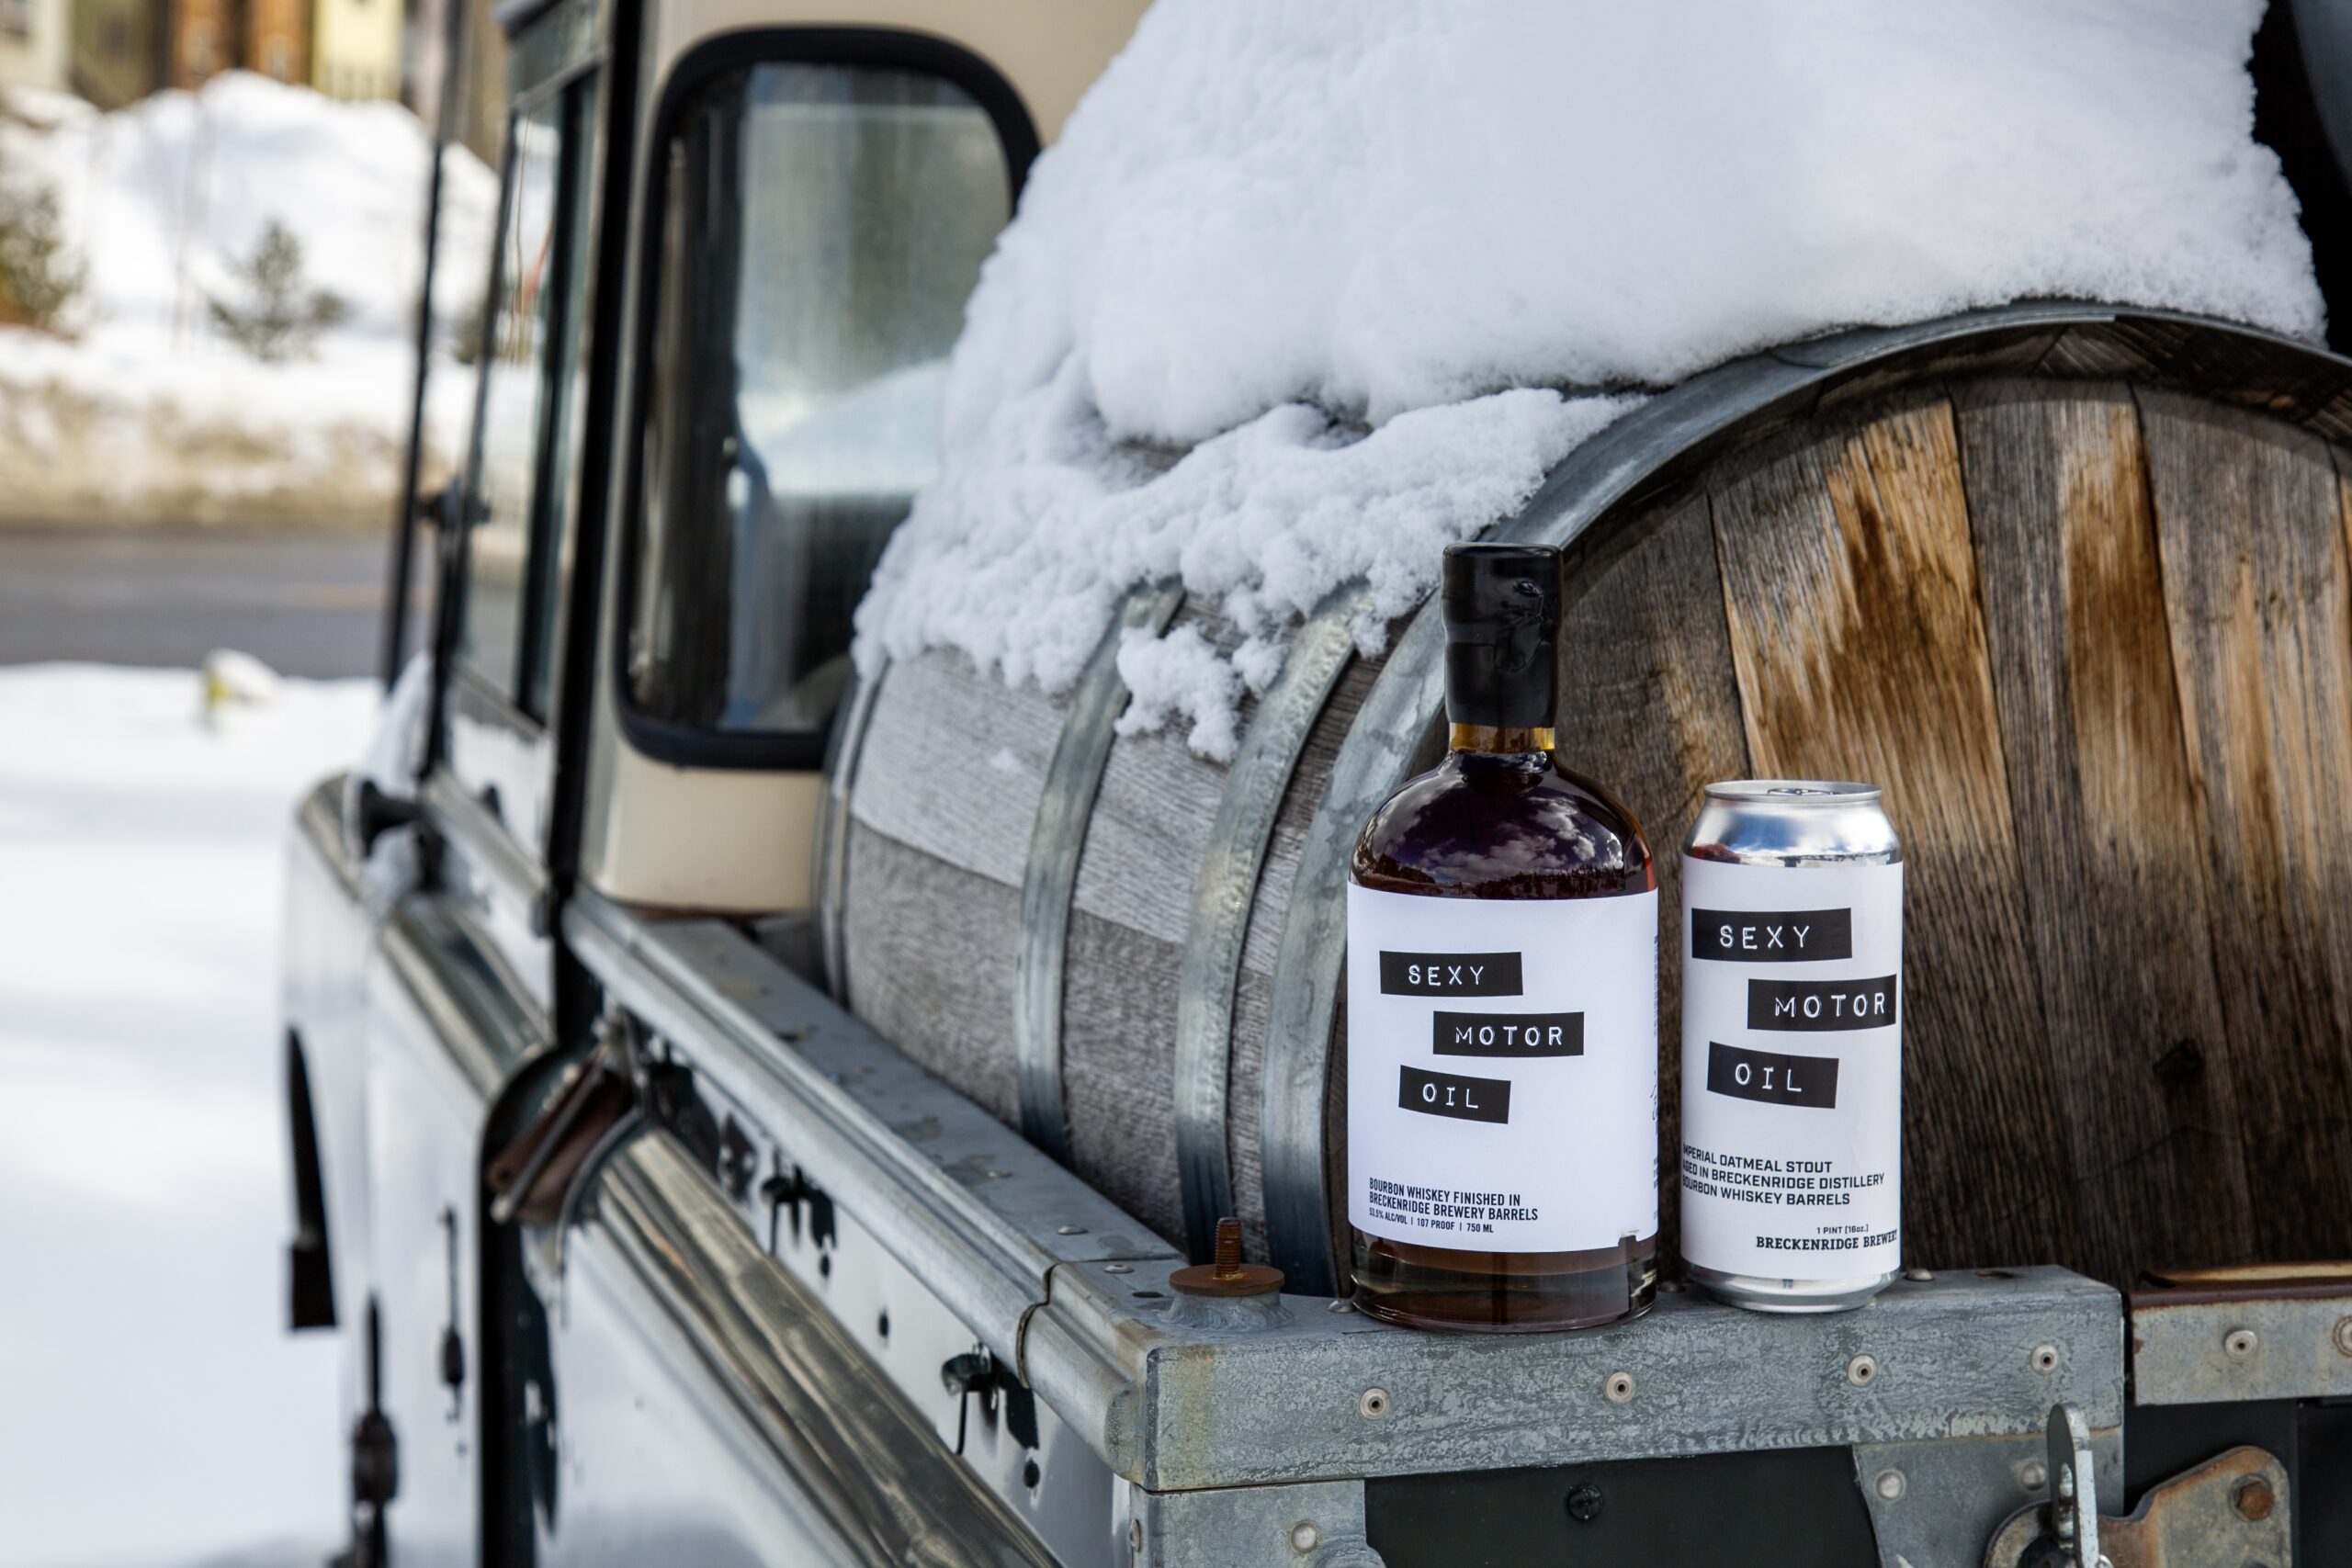 Breckenridge Distillery Collaborates for New Release of its Sexy Motor Oil Whiskey